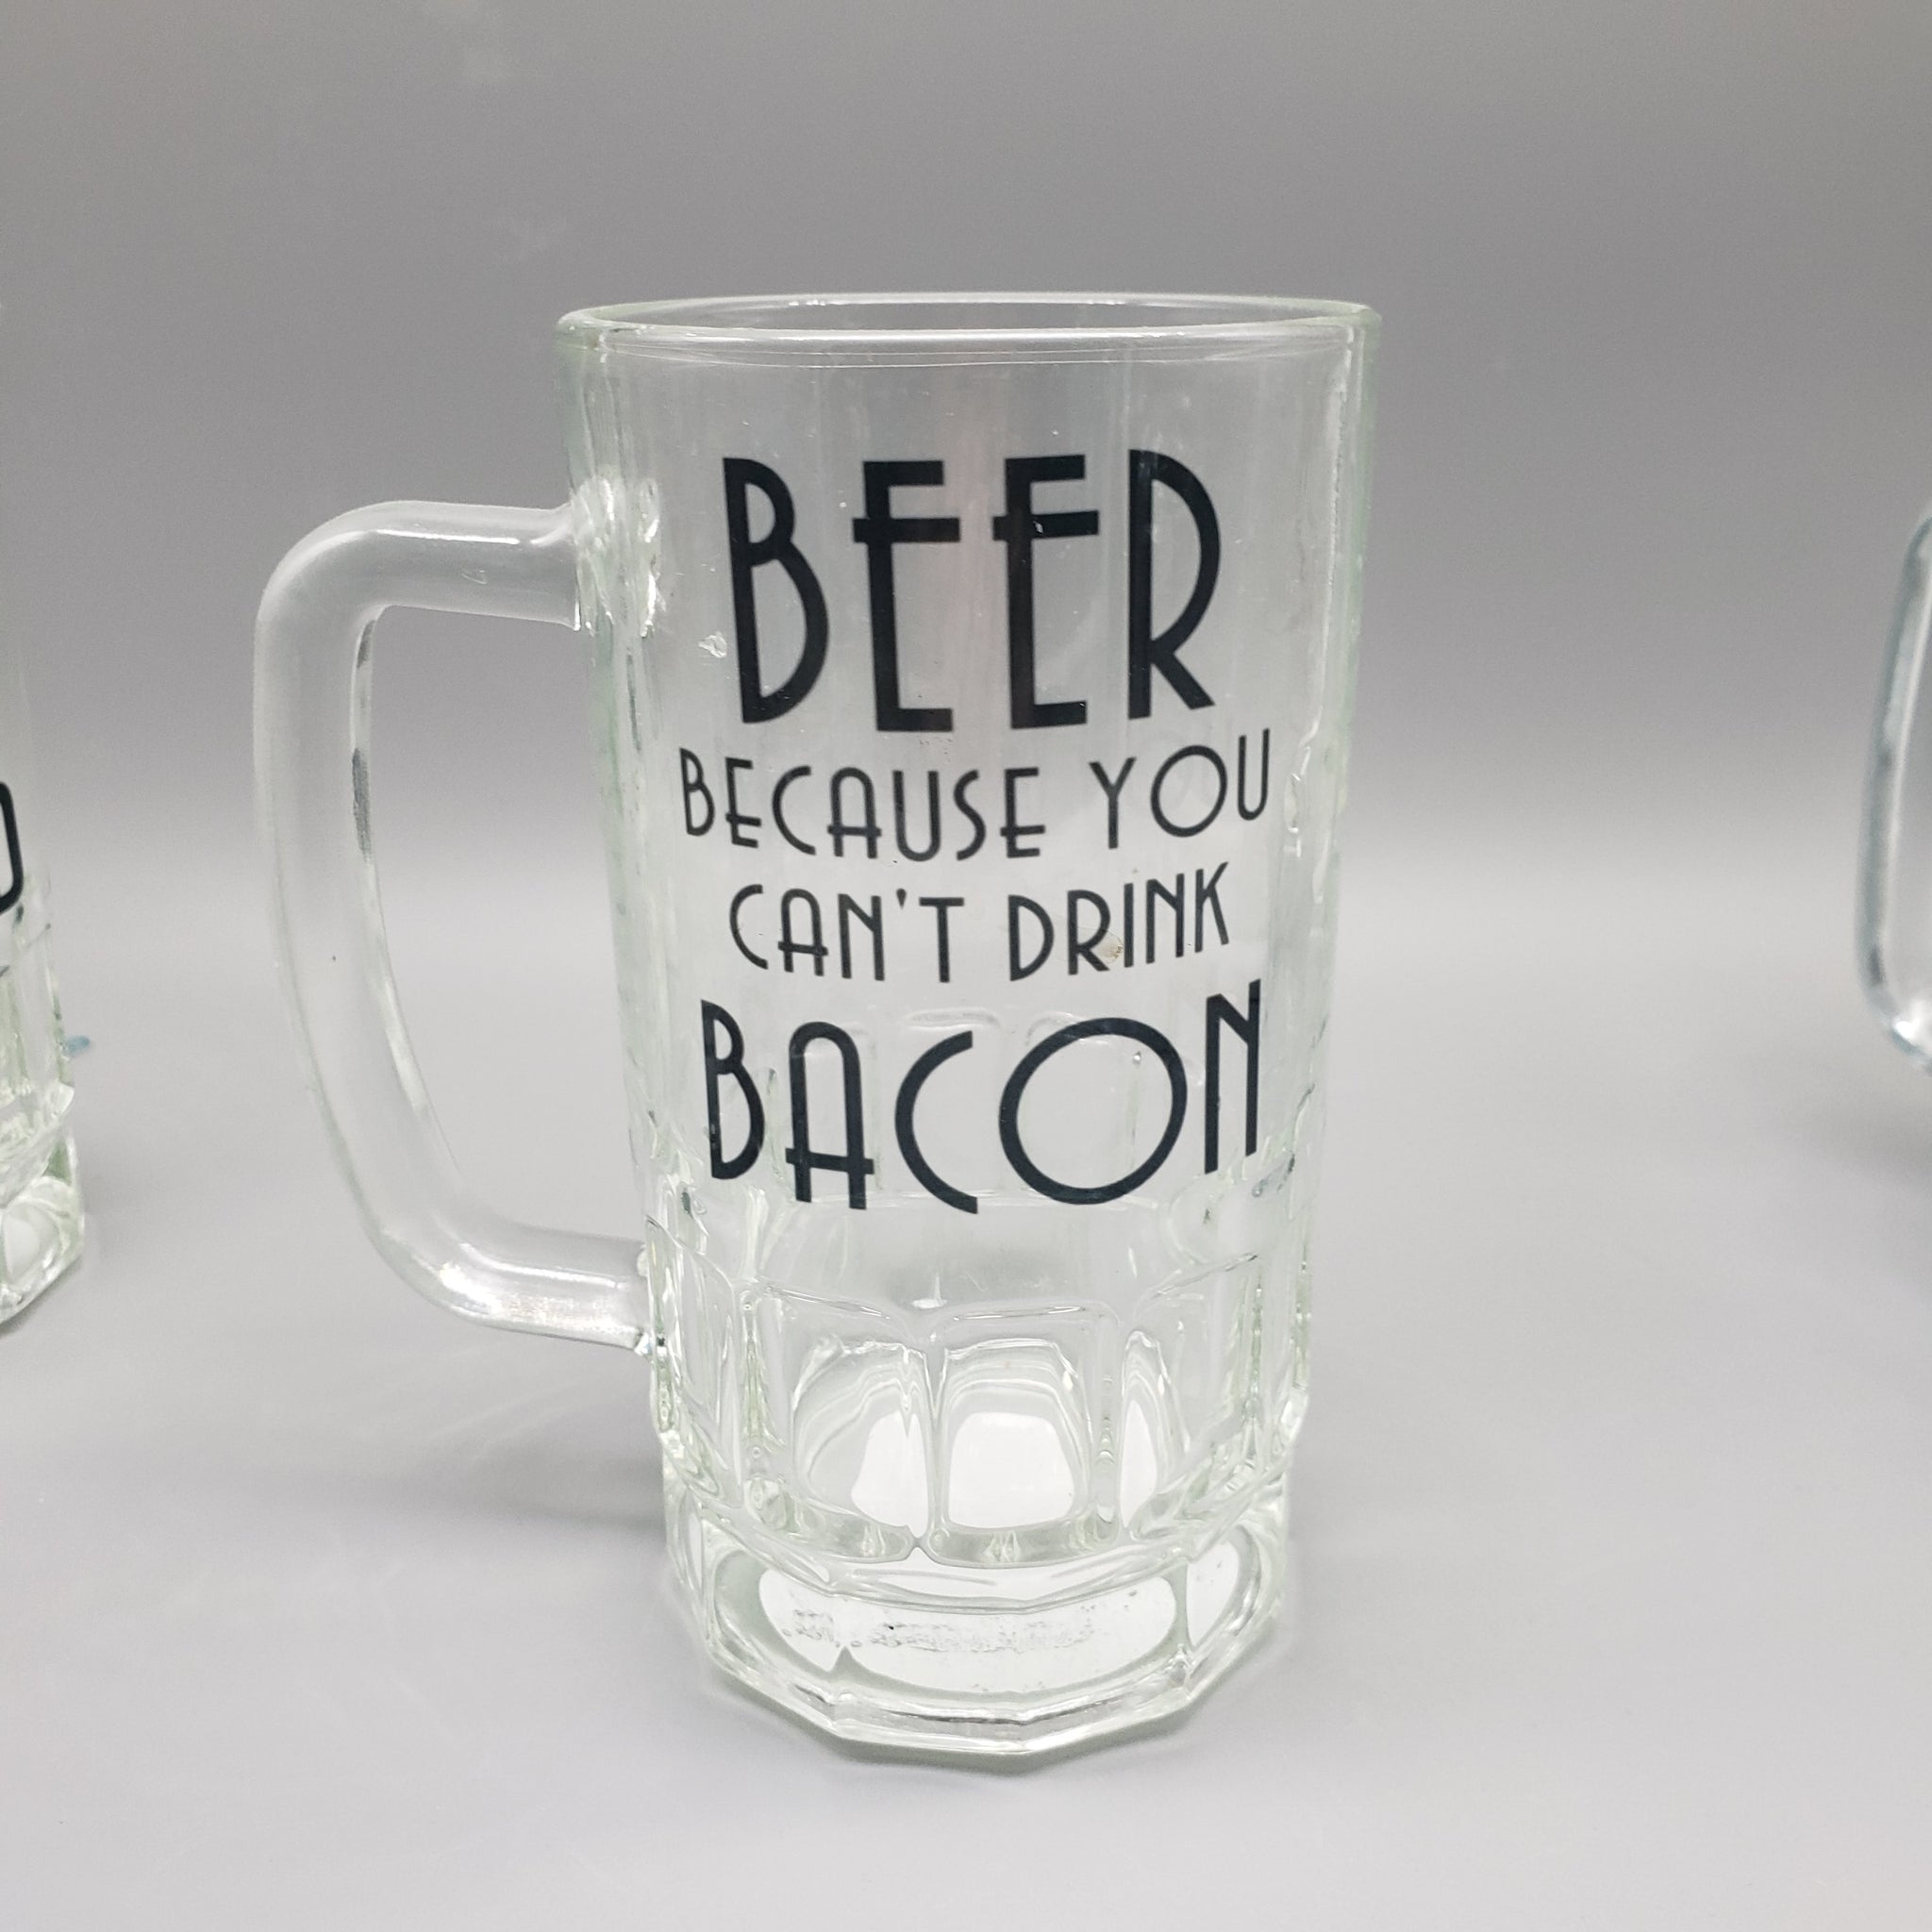 Beer because you can't eat bacon